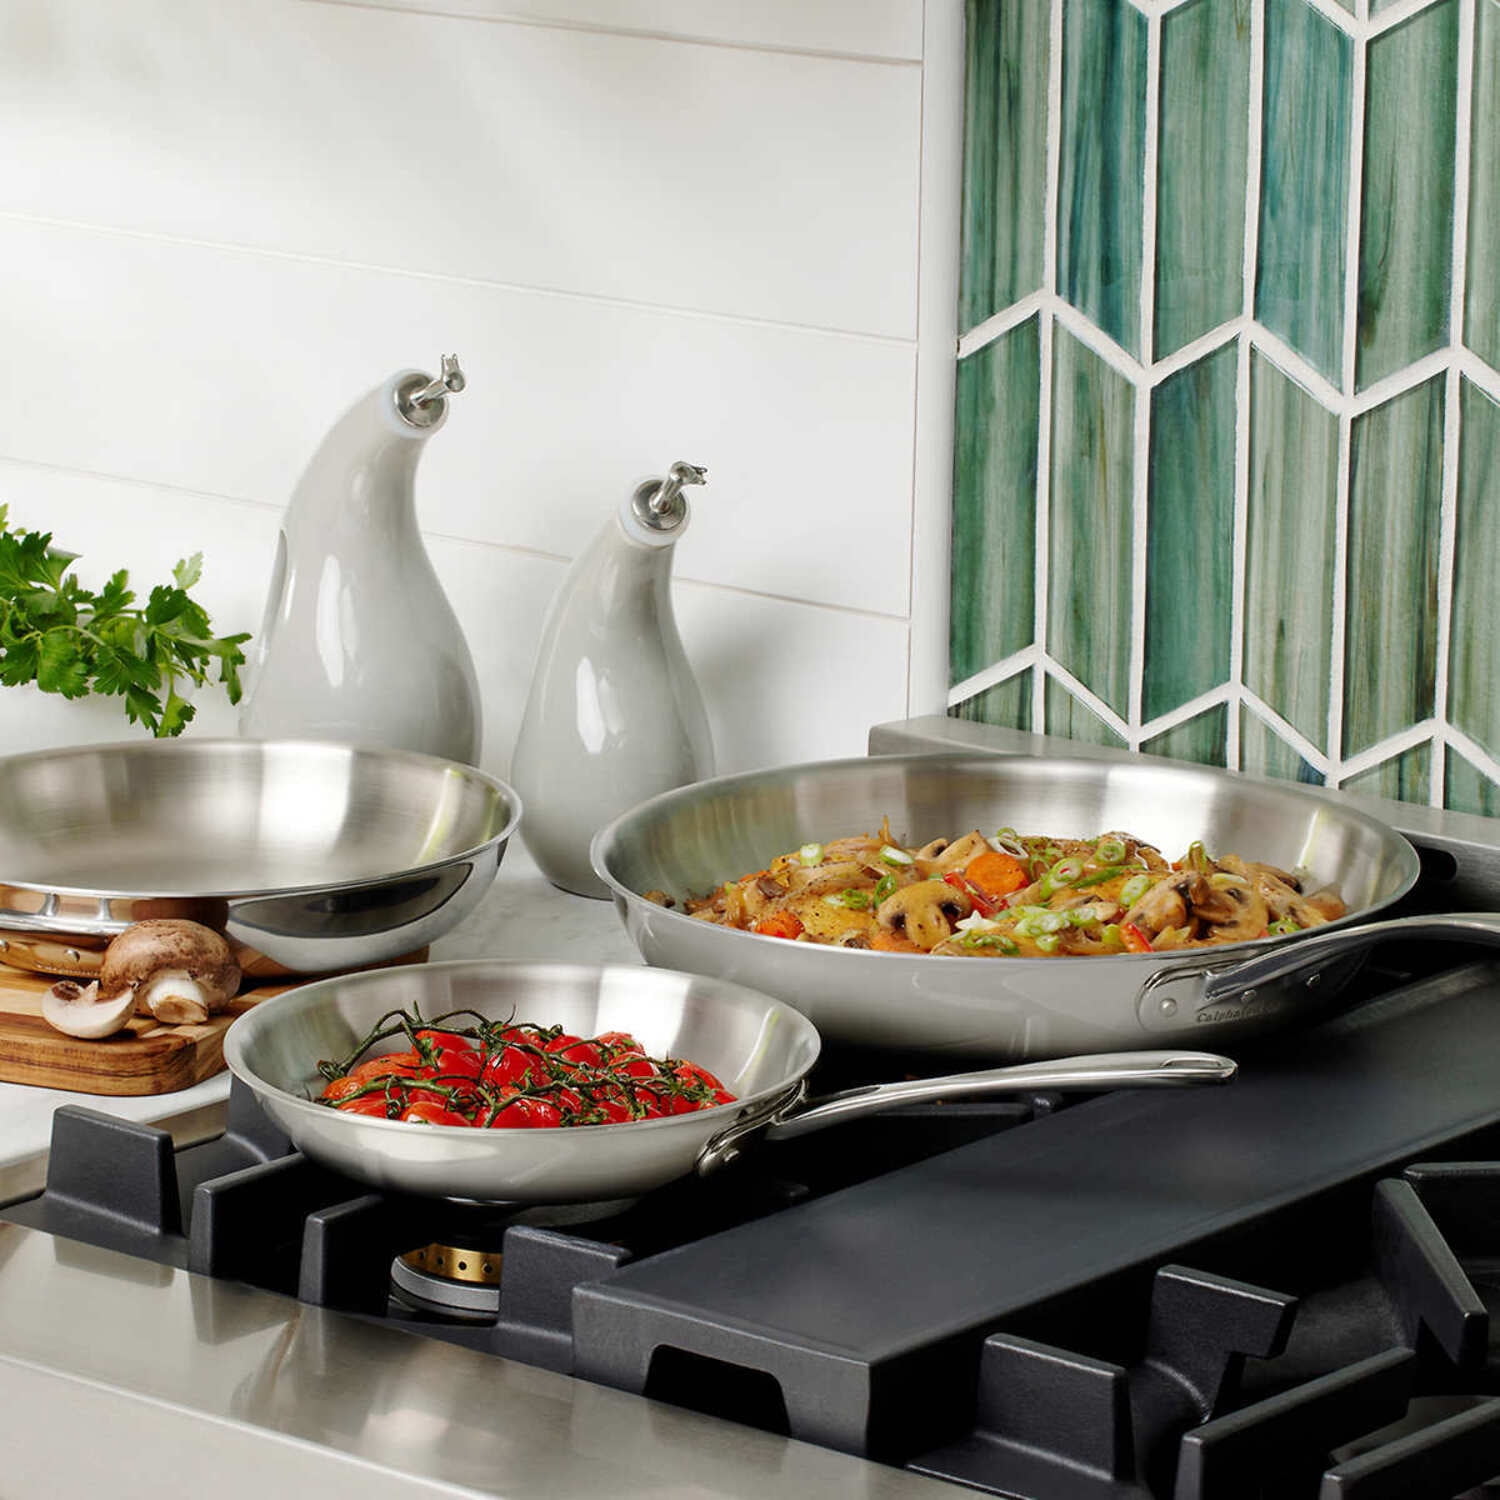 Calphalon® Calphalon Tri-Ply Stainless Steel Cookware Collection